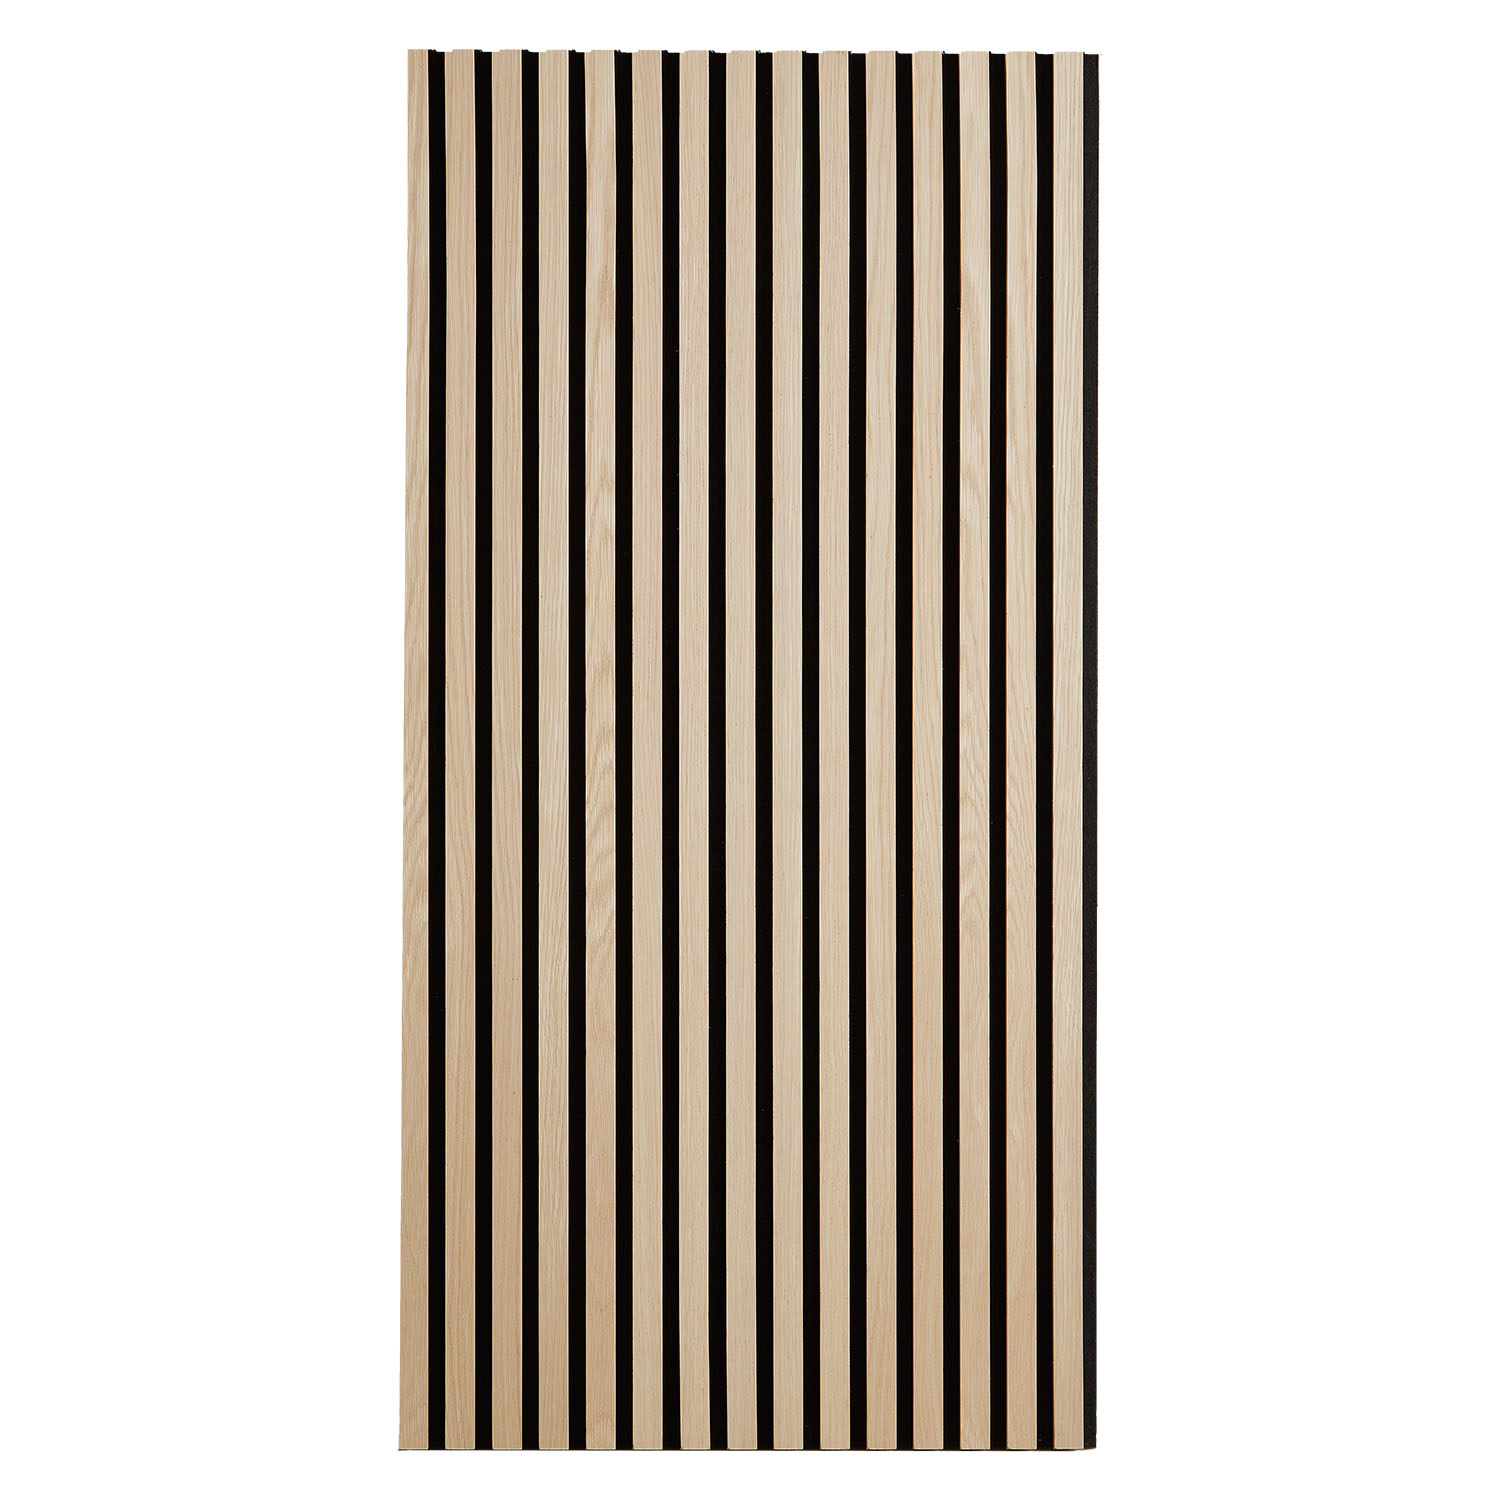 2 Wall panels 60 x 120 cm Natural wood paneling for walls Acoustic panels Bedroom paneling Wall cladding Acoustic sound panels Sound proof panels